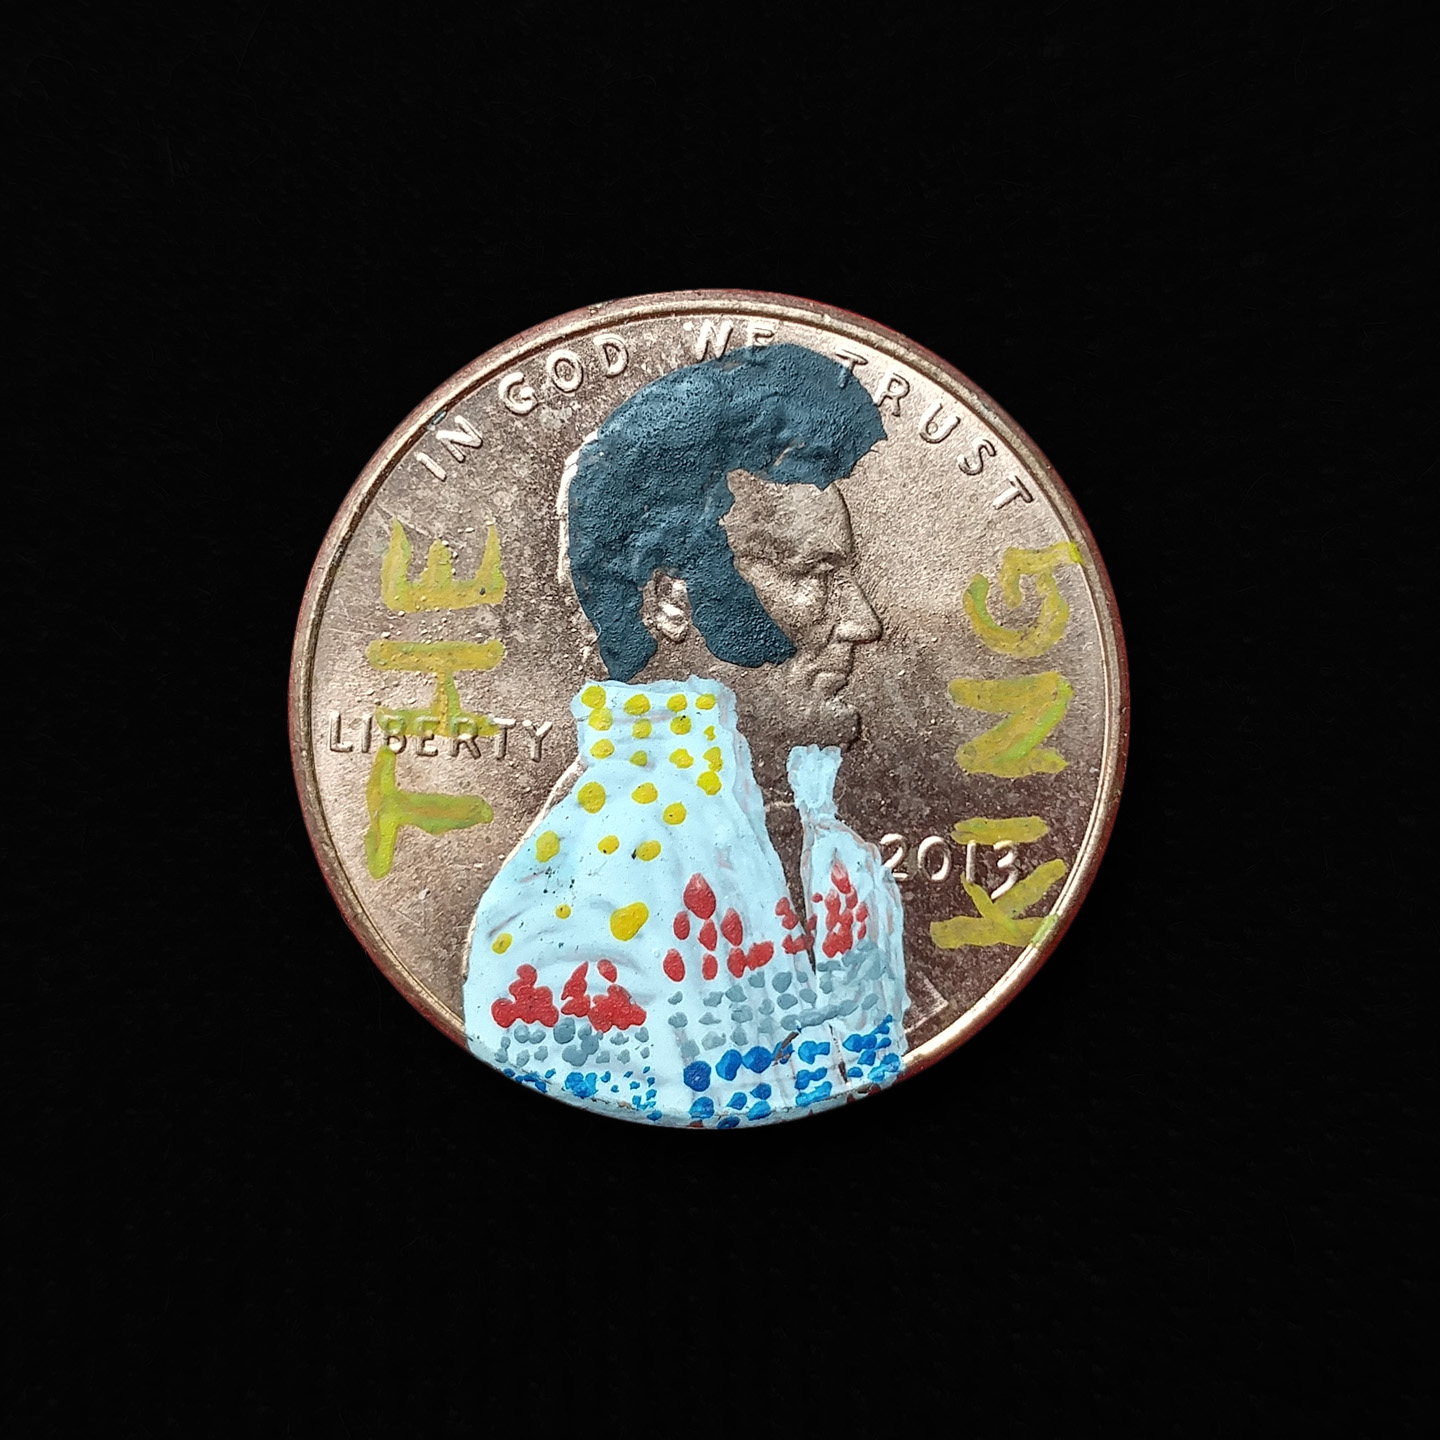 Elvis painted on a penny